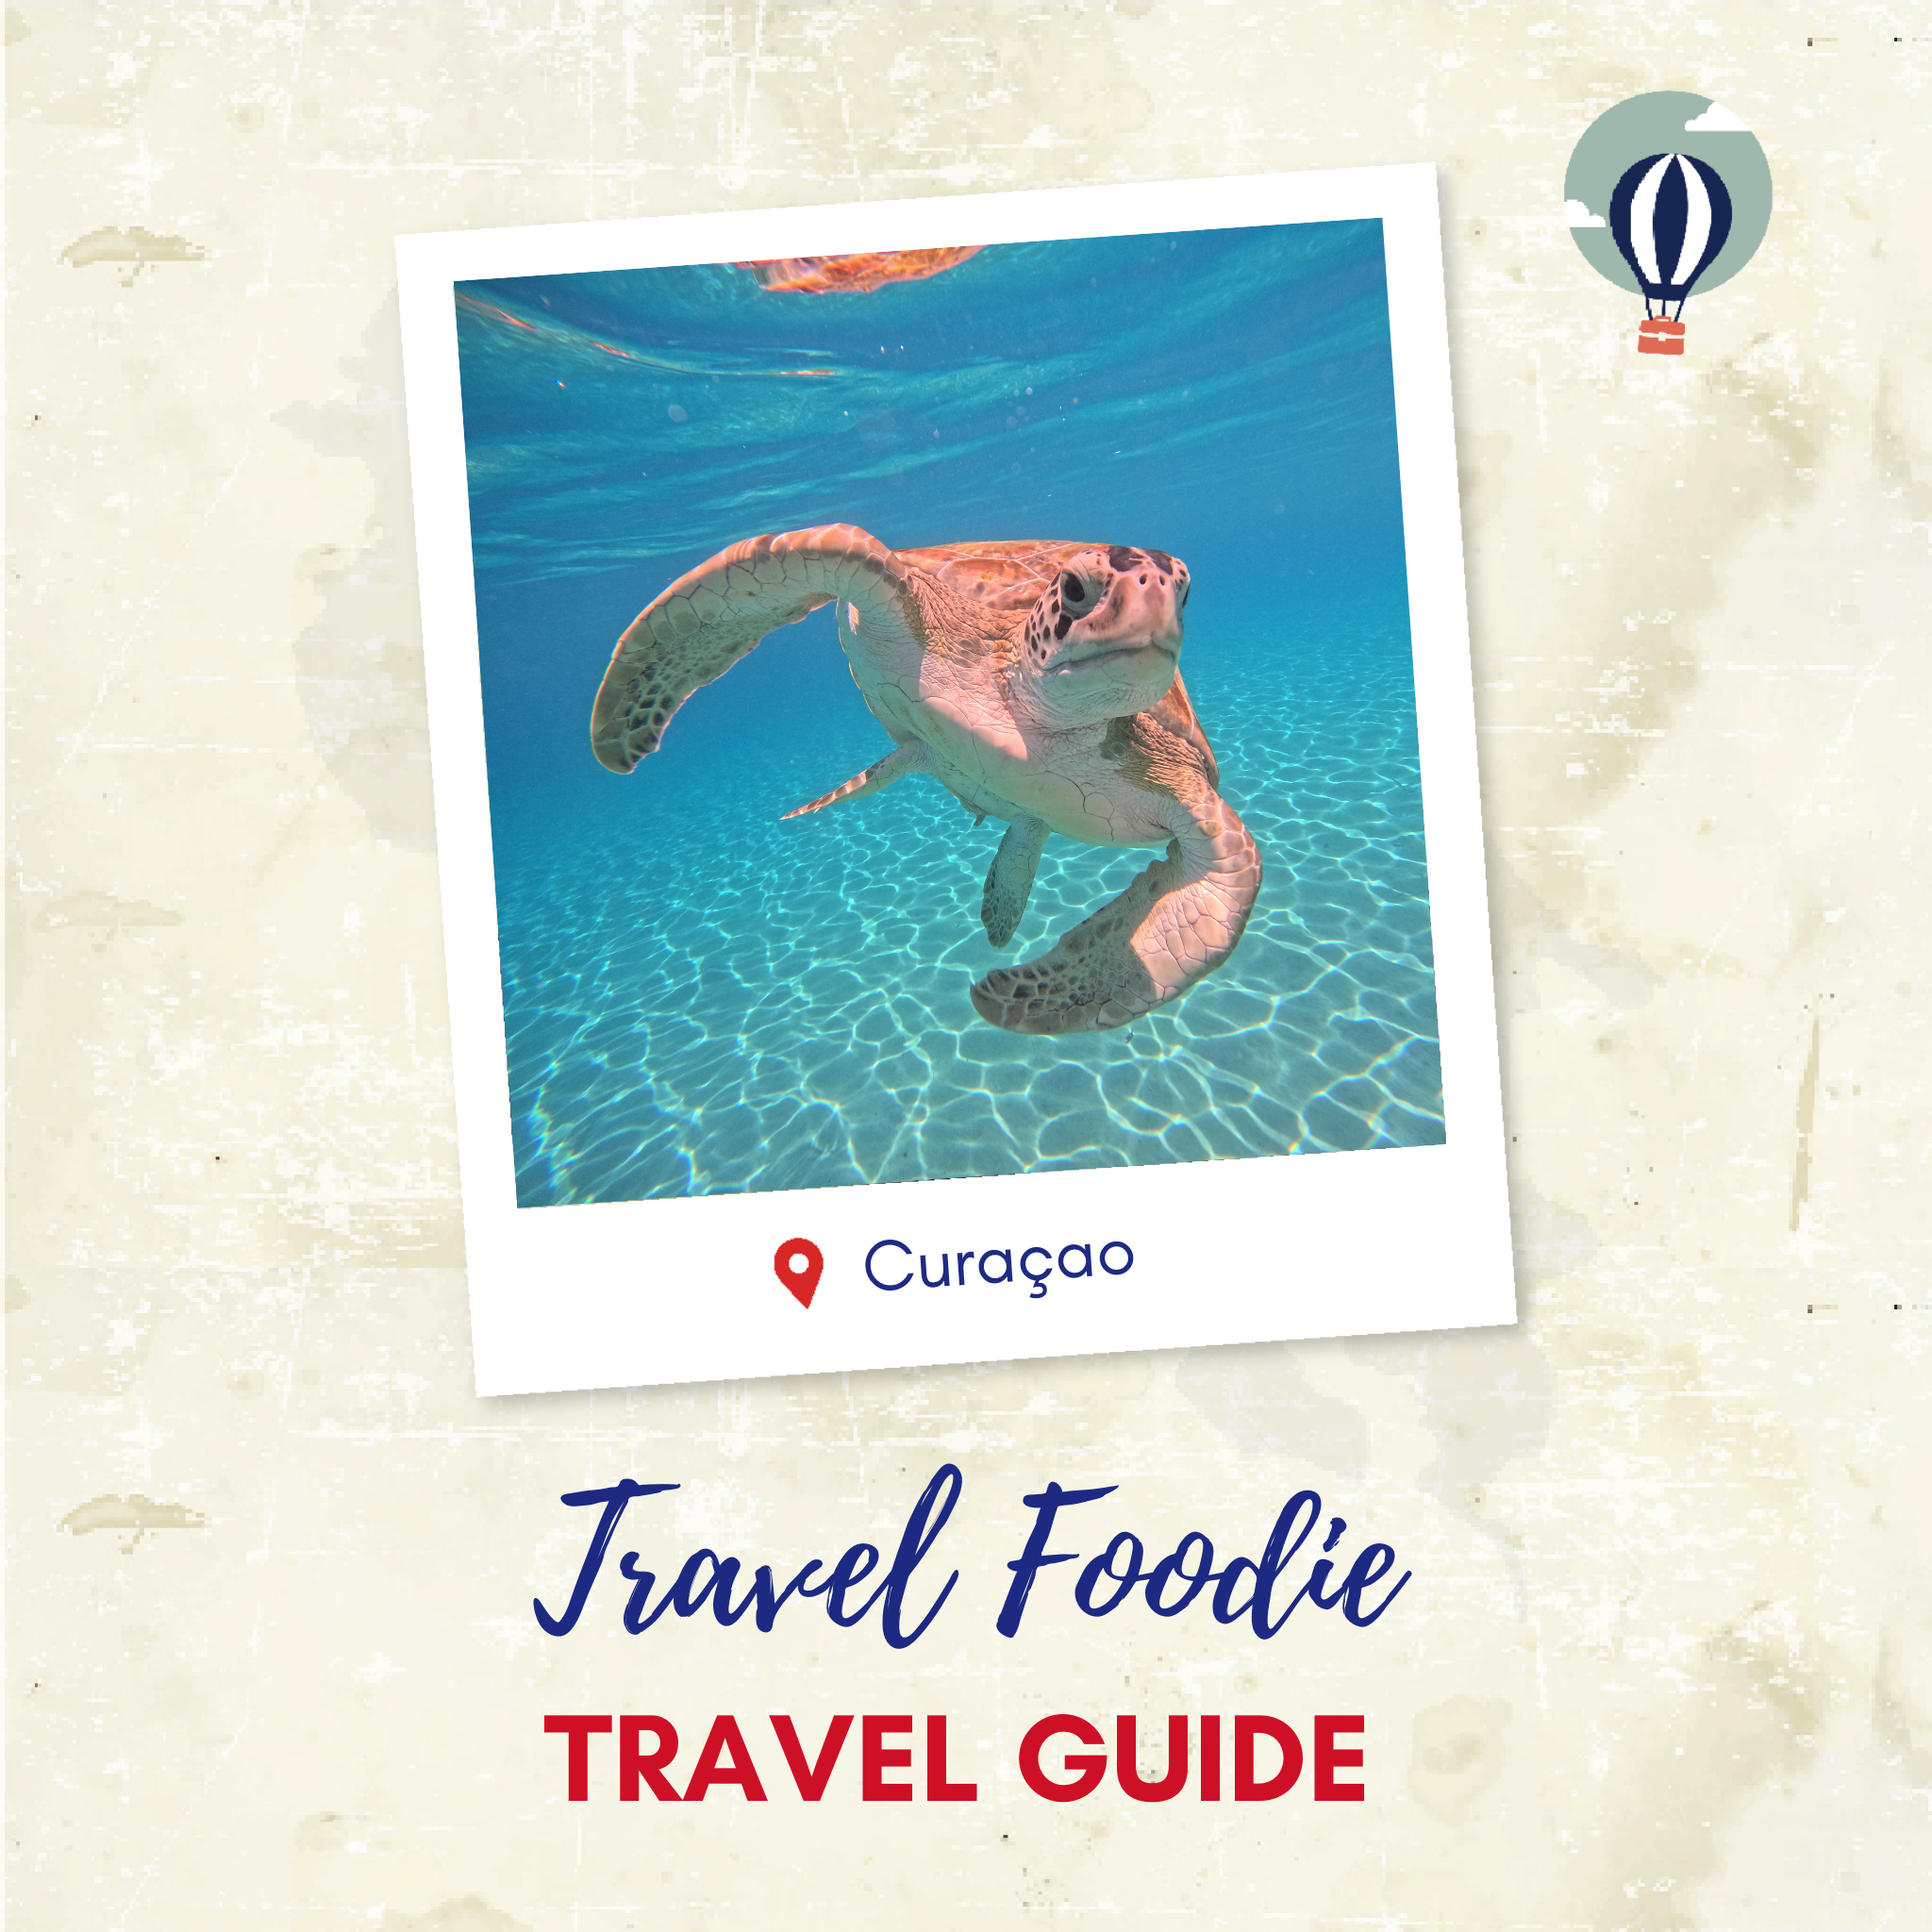 Curaçao Travel Itinerary Planner for Travel Foodies, Cover